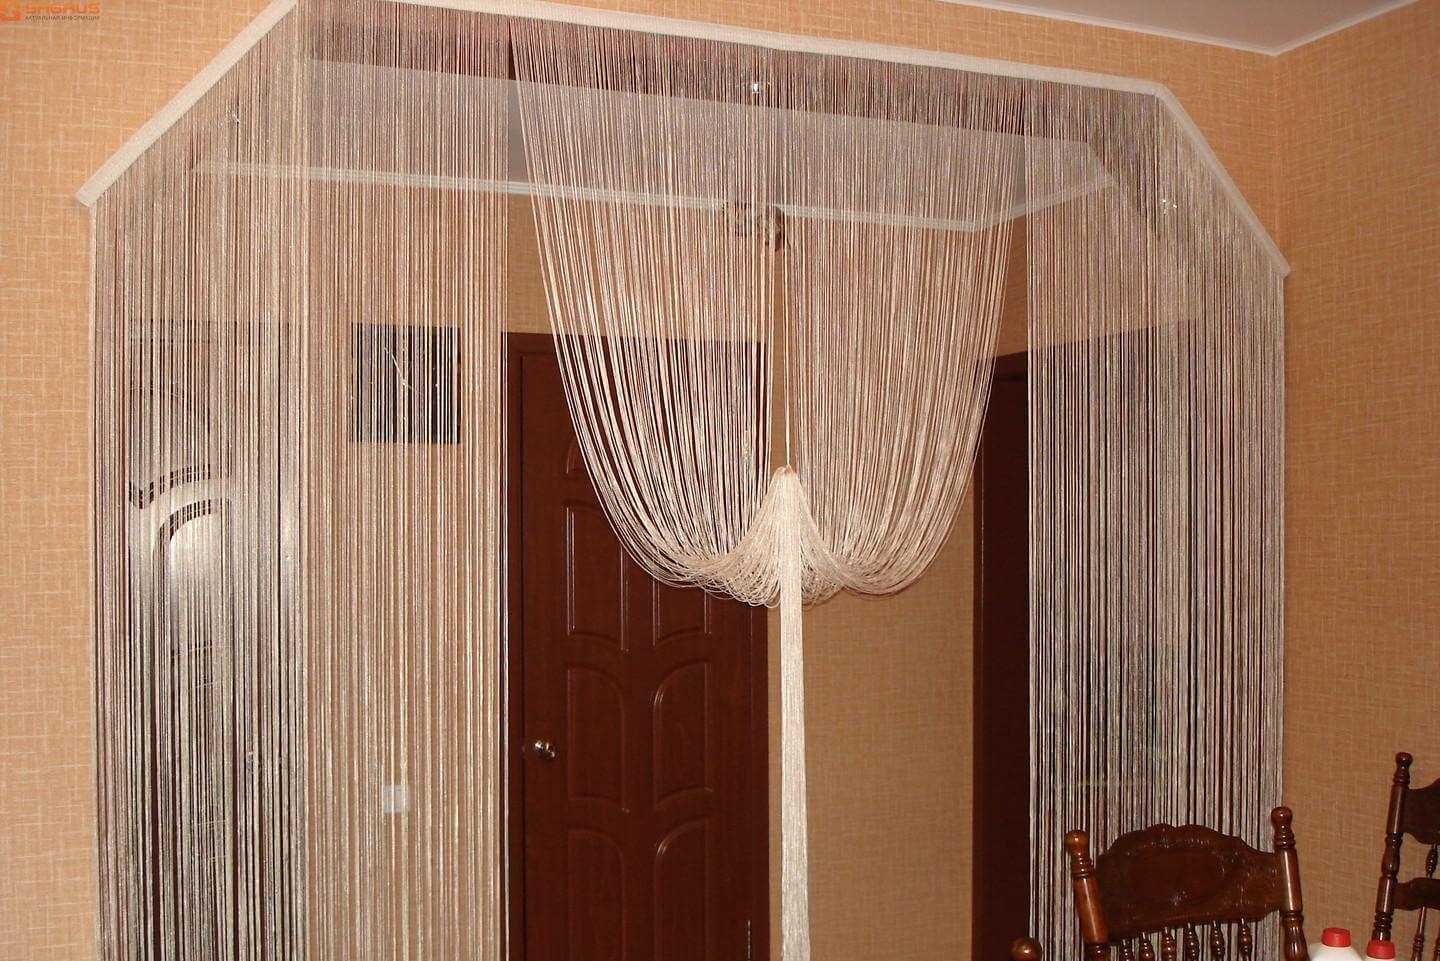 variant of unusual decorative curtains in the style of the room